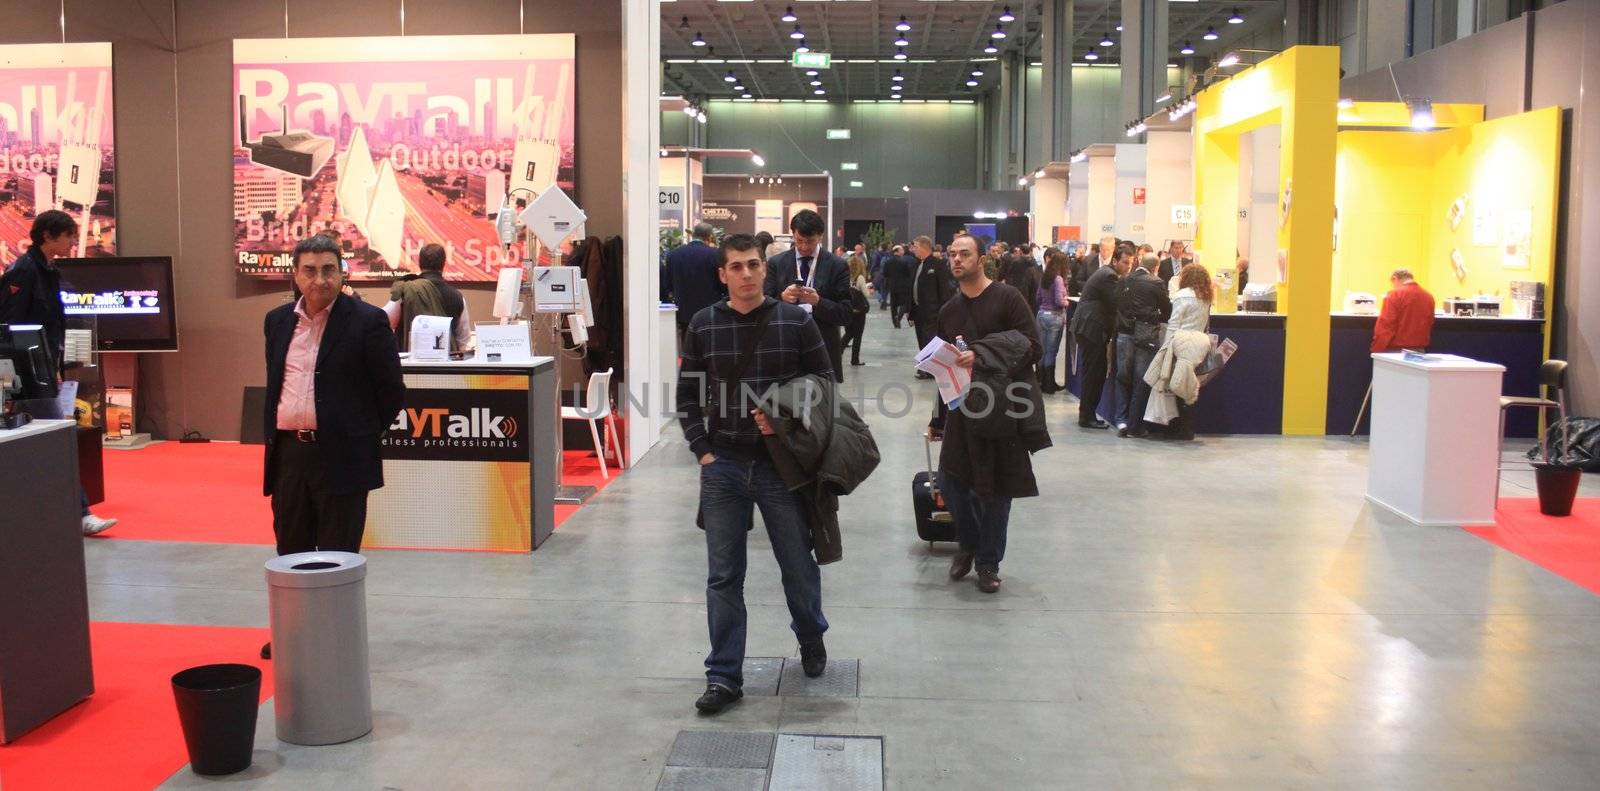 People walking trough the stands at Smau, national fair of business intelligence and information technology October 21, 2009 in Milan, Italy.